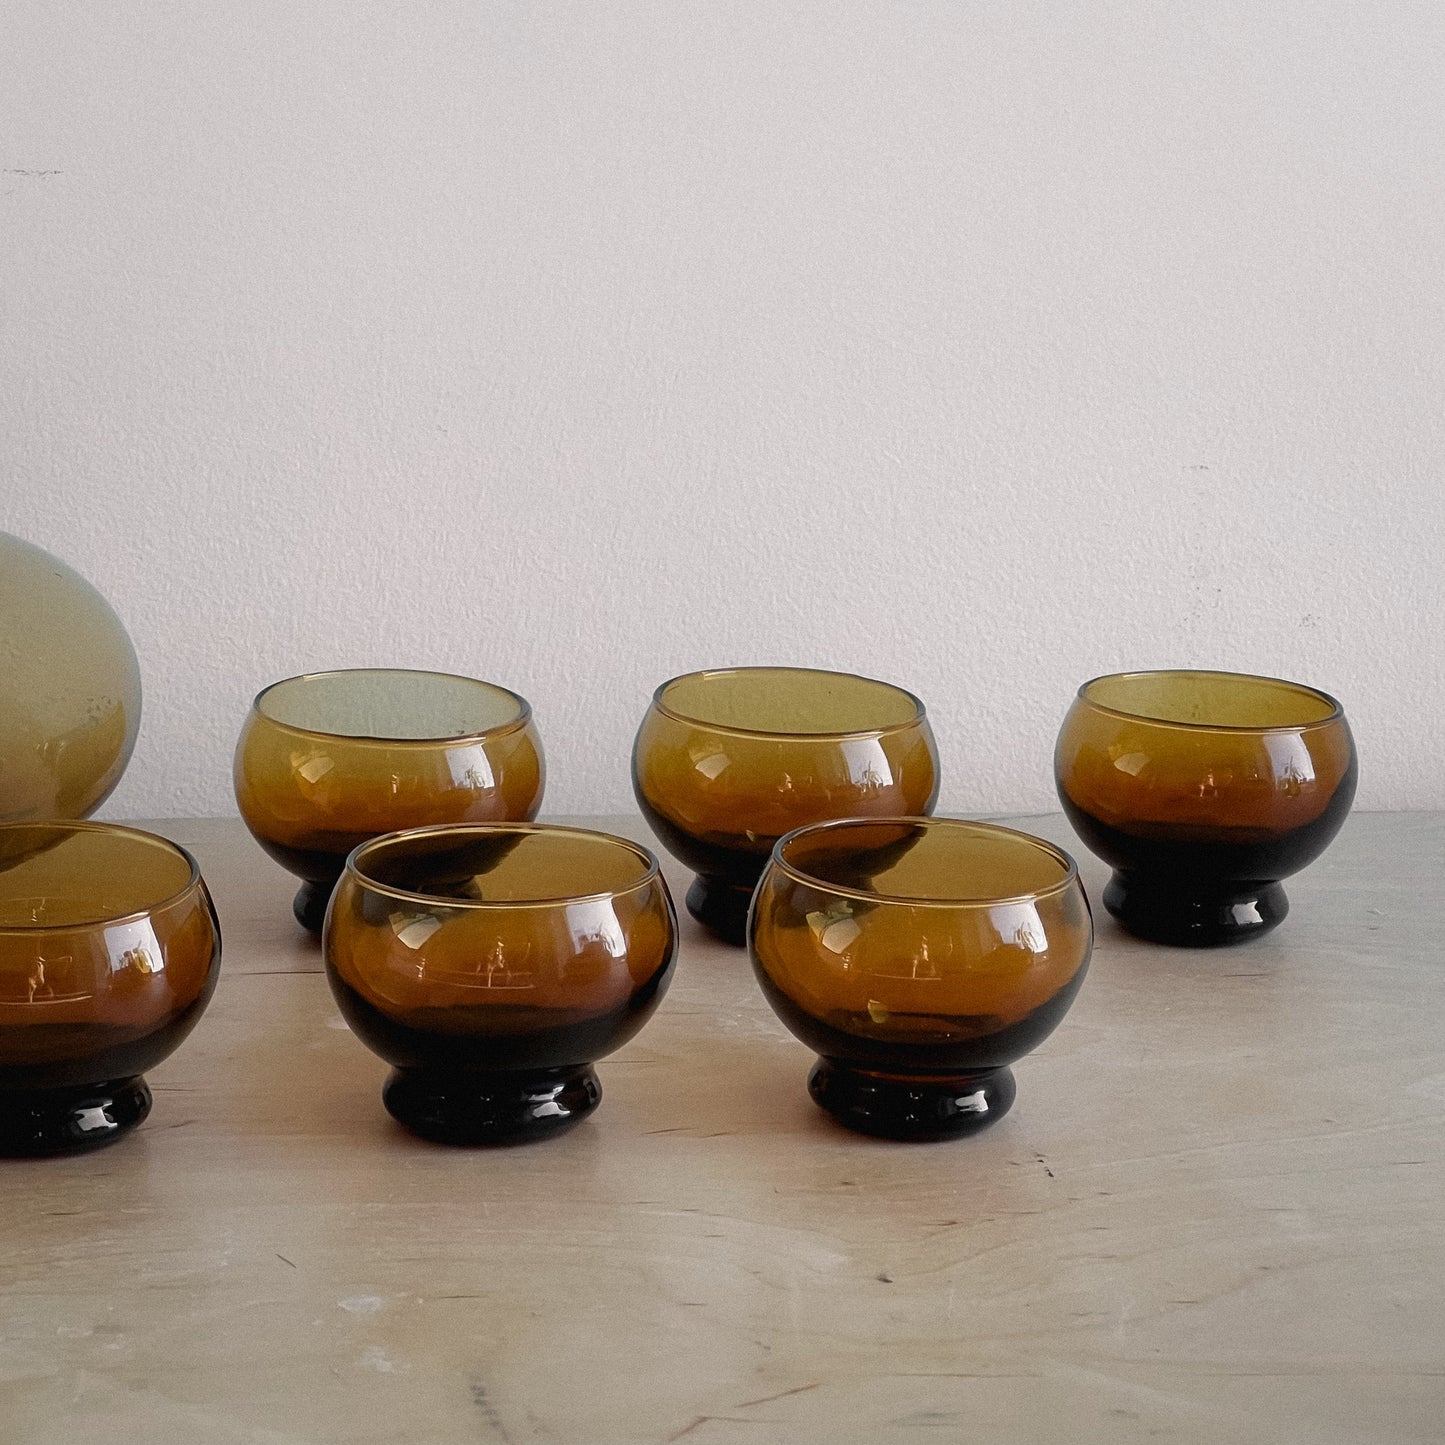 1960s Amber Glass Decanter set with 6 Apertif Glasses